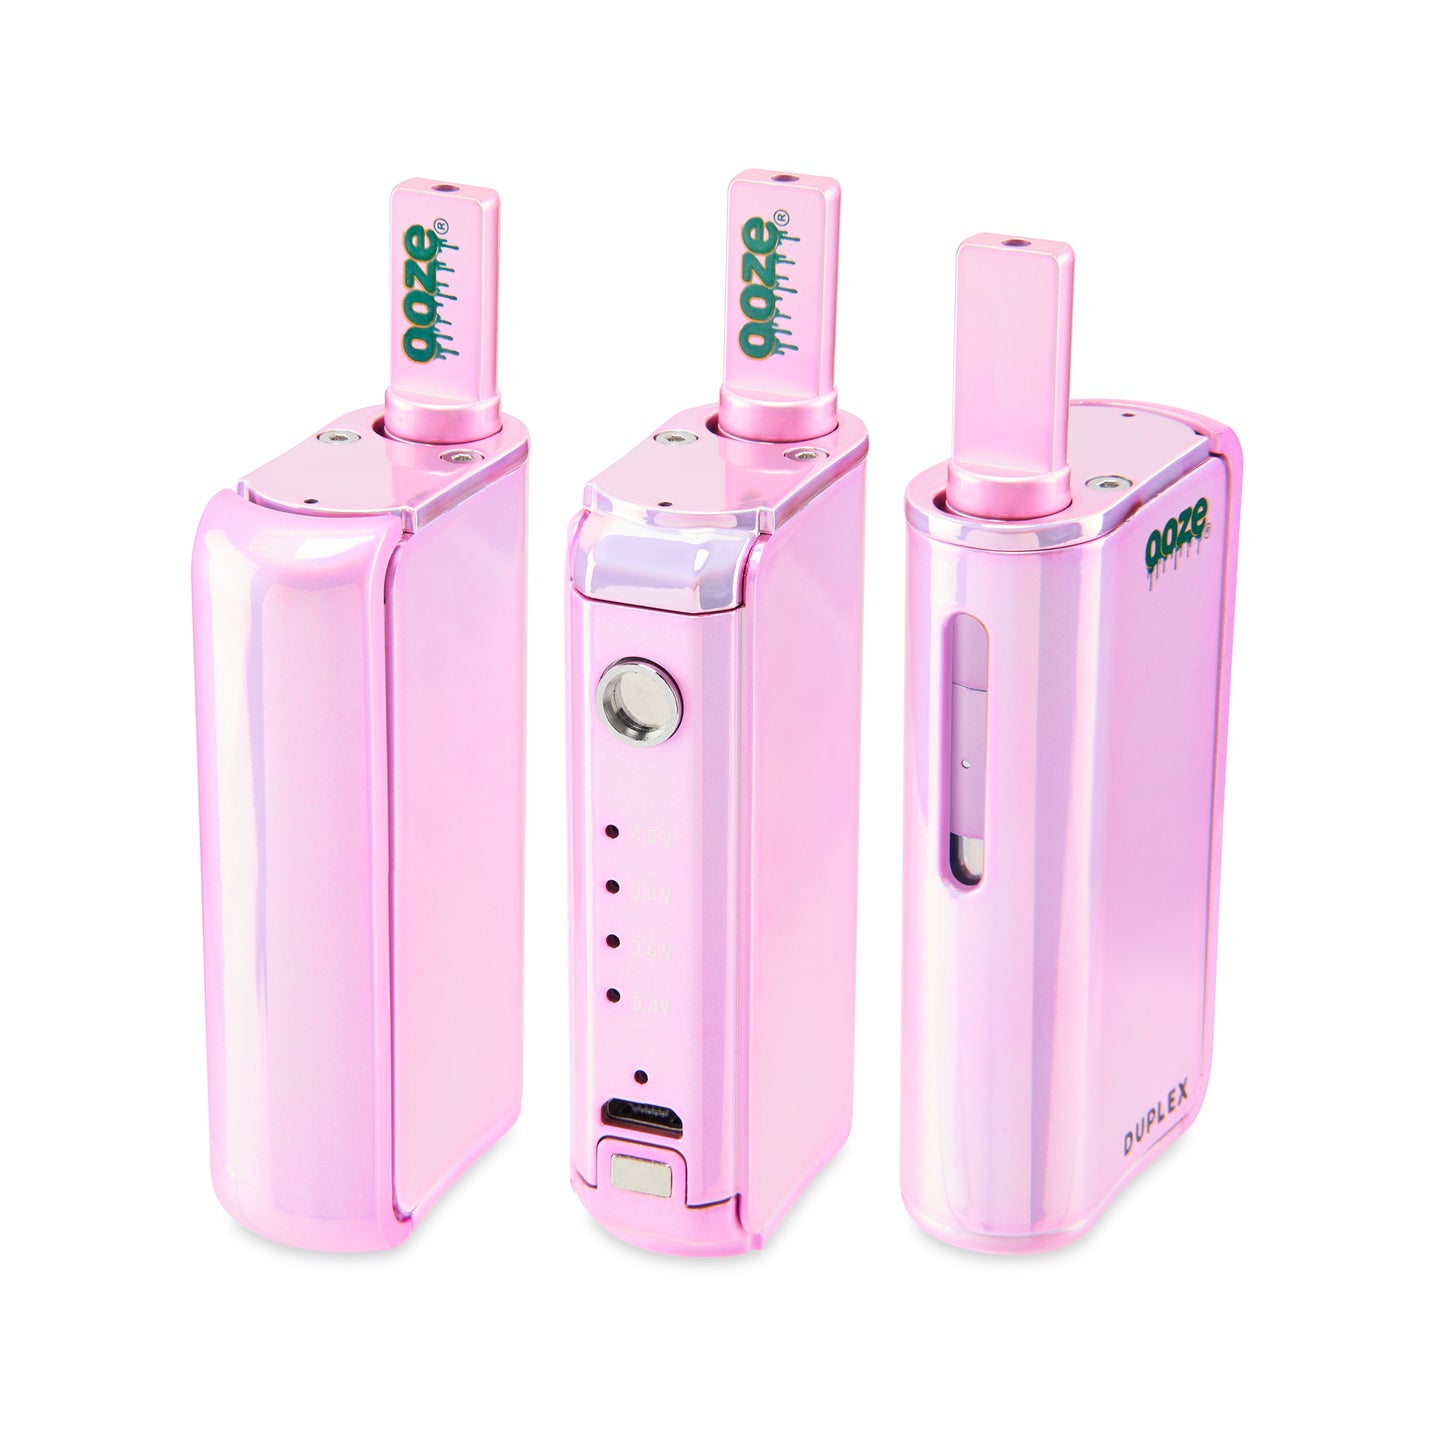 Three of The Ice Pink Ooze Duplex Pro Vaporizers are in a line. The right has the magnetic button on, the middle has it off, and the left shows the opposite side of the device.